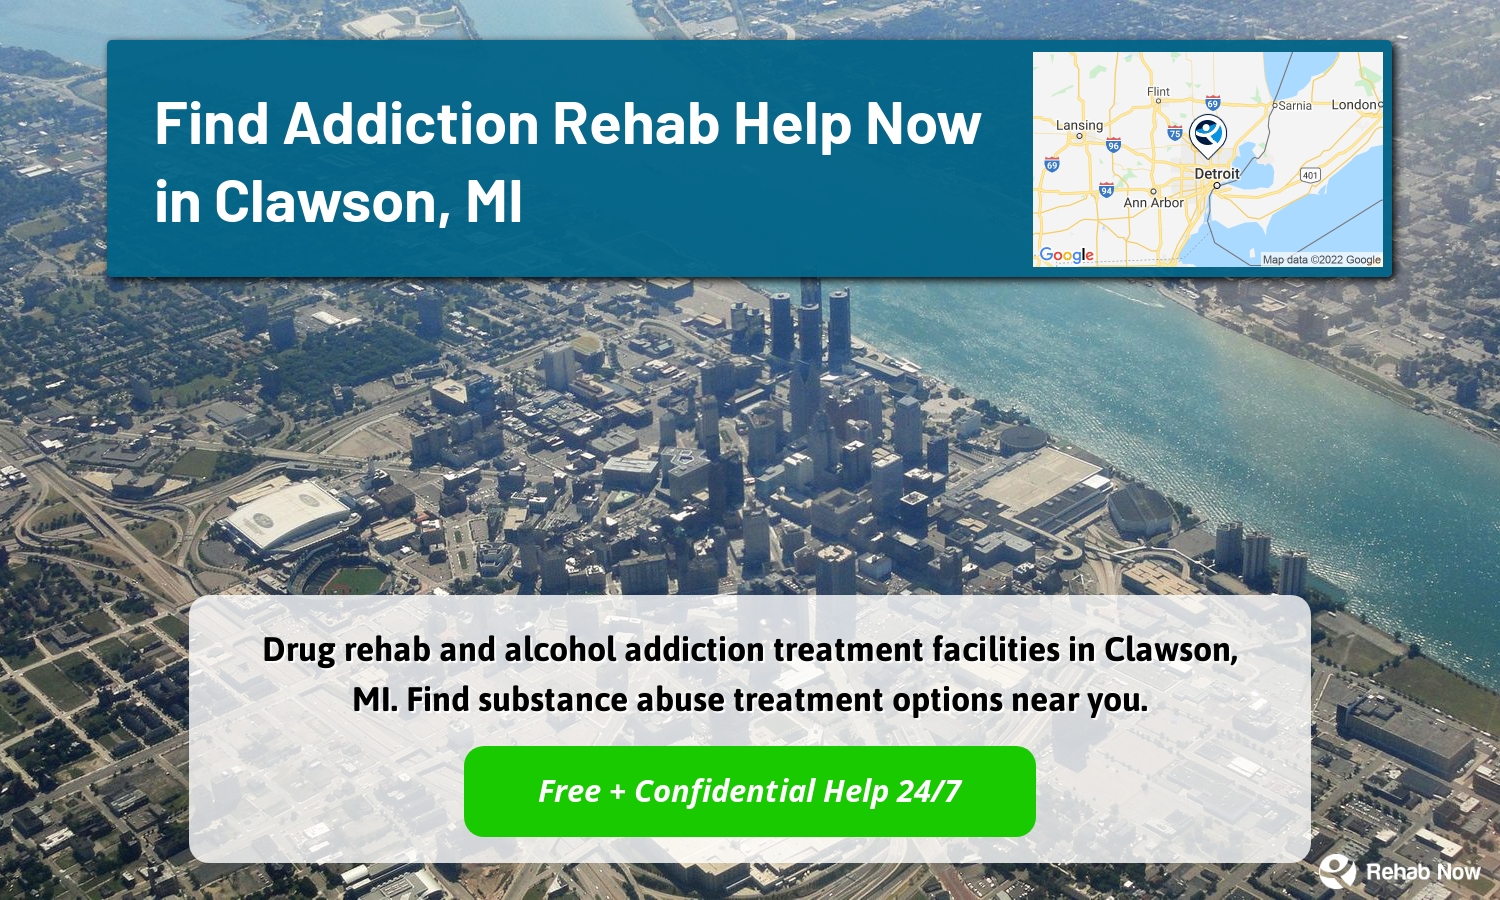 Drug rehab and alcohol addiction treatment facilities in Clawson, MI. Find substance abuse treatment options near you.